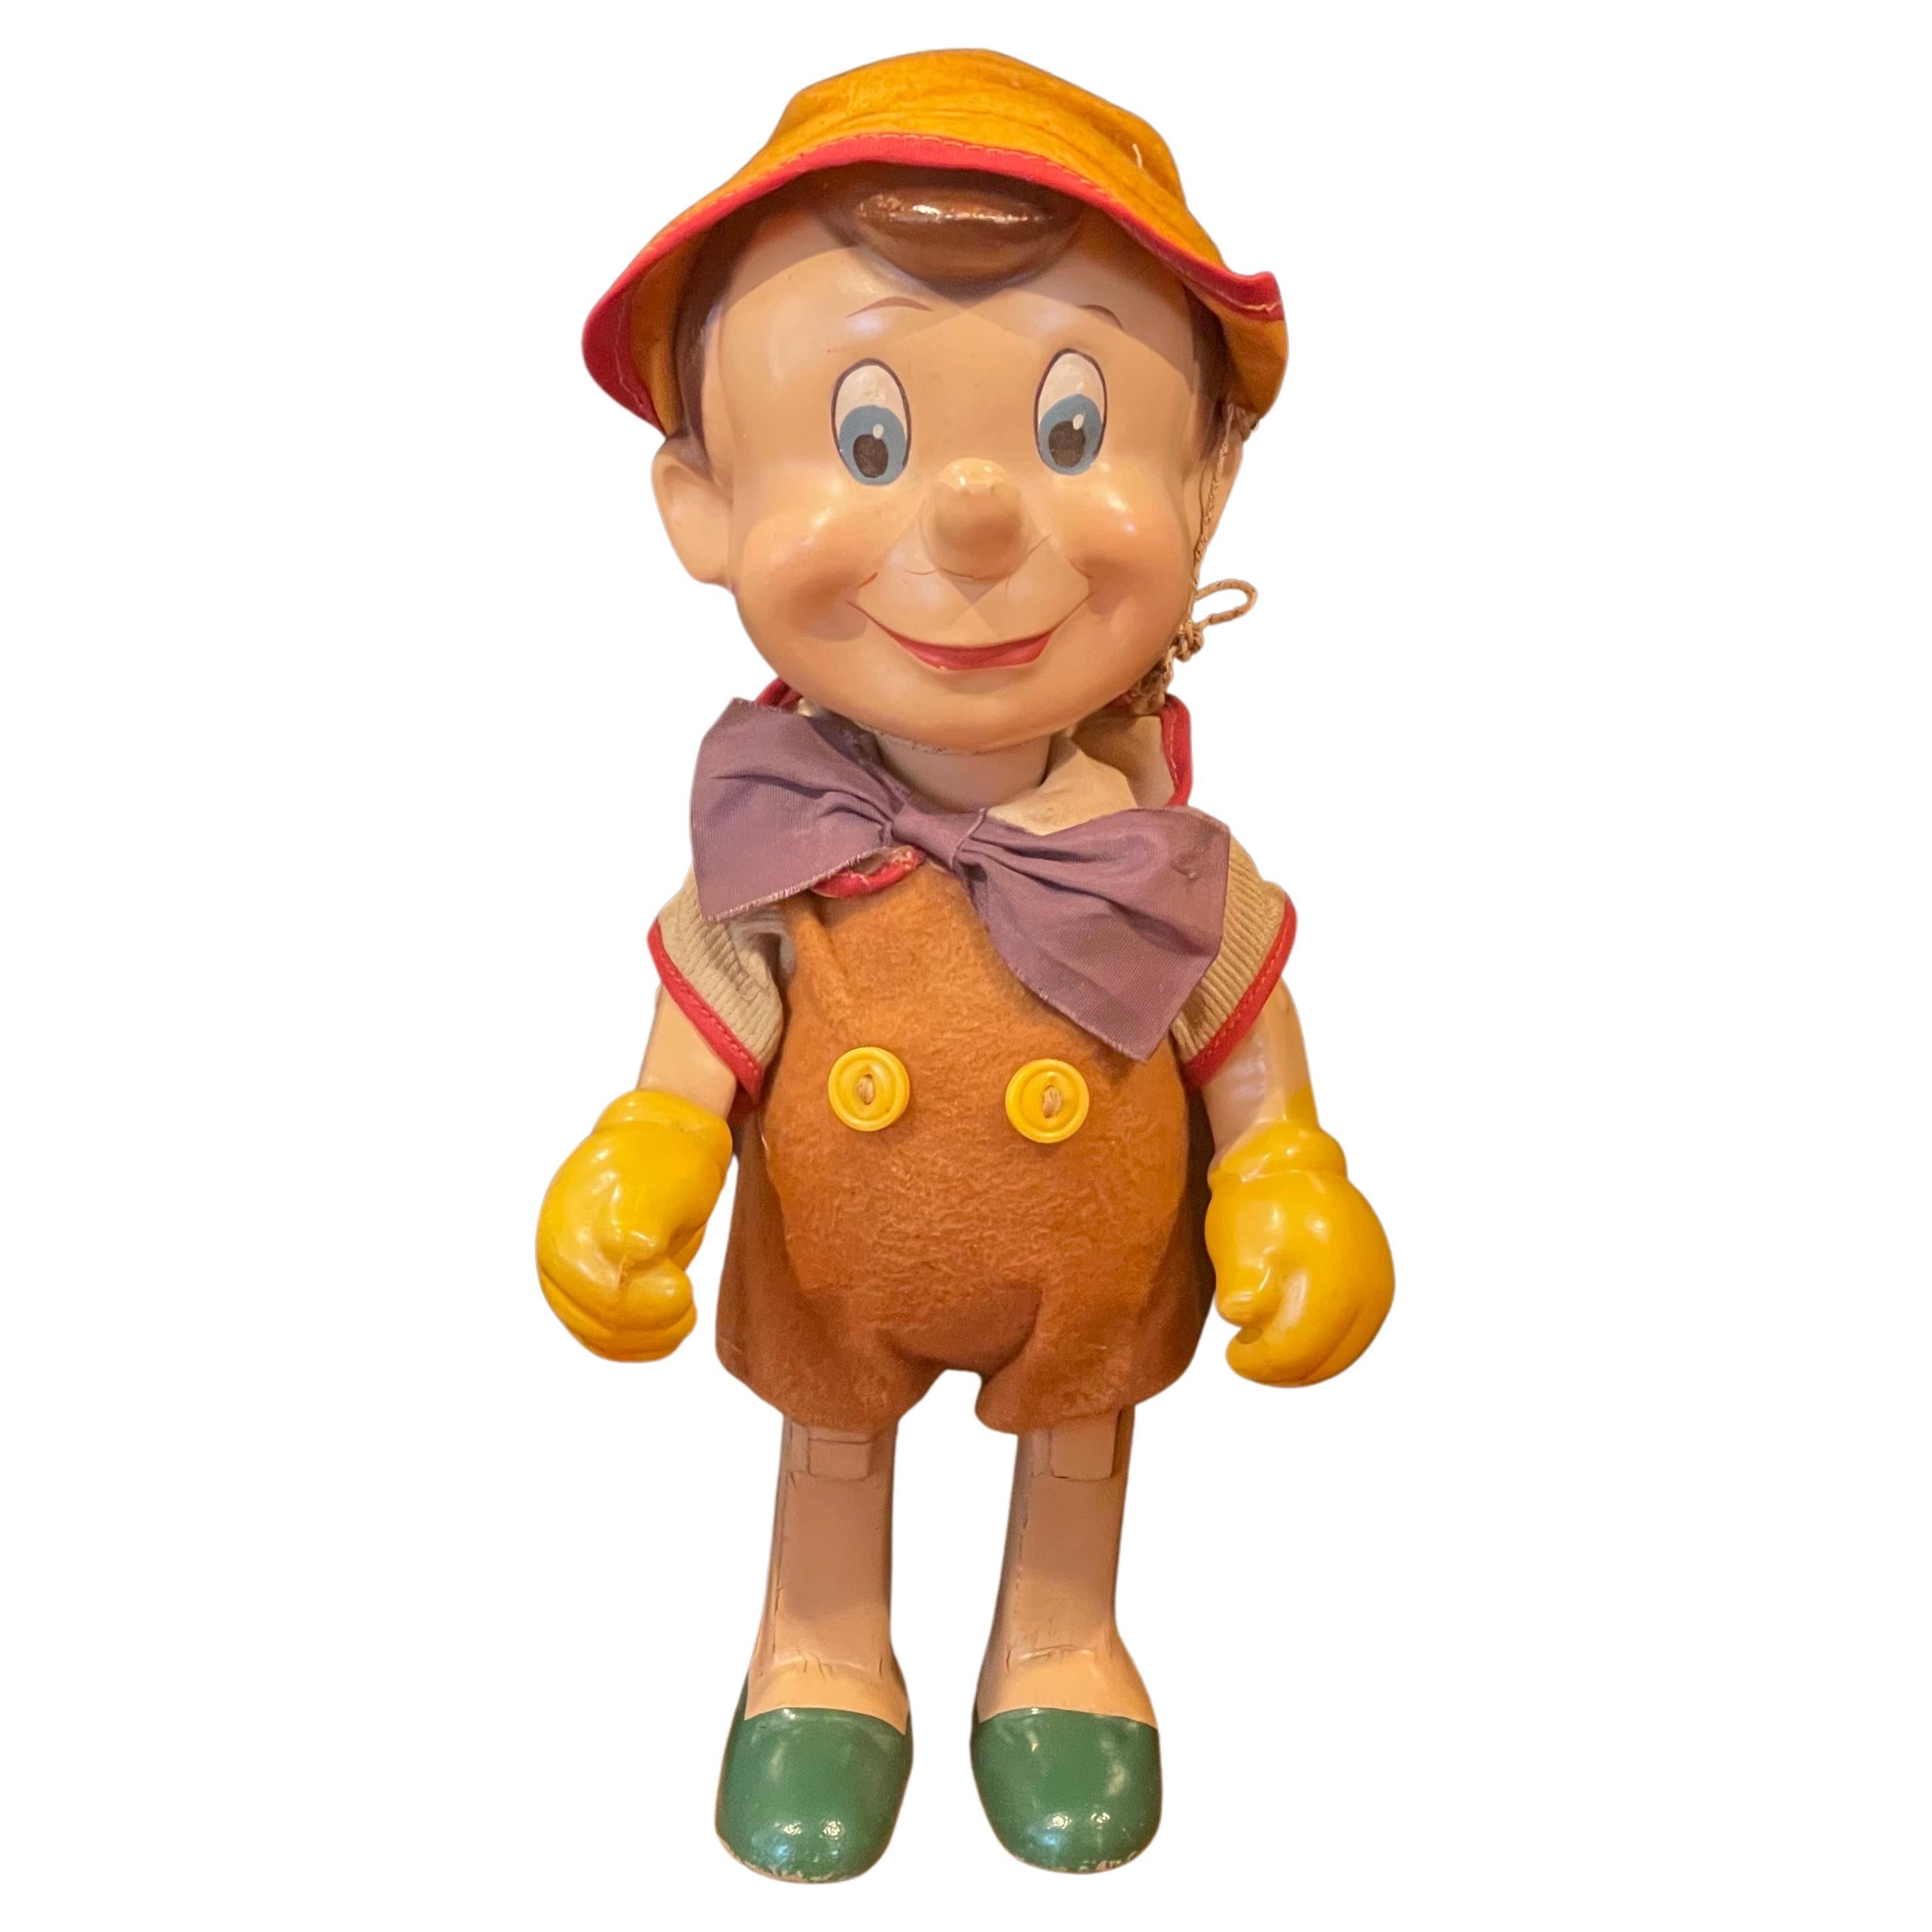 A vintage composition Pinocchio doll by Knickerbocker Toy company, likely from the 1930s. The doll’s back is embossed with “Pinocchio - W.D. PR KNT CO - Copyright U.S.A.” The composition doll has moveable arms and a moveable head. Measuring 4.75” W